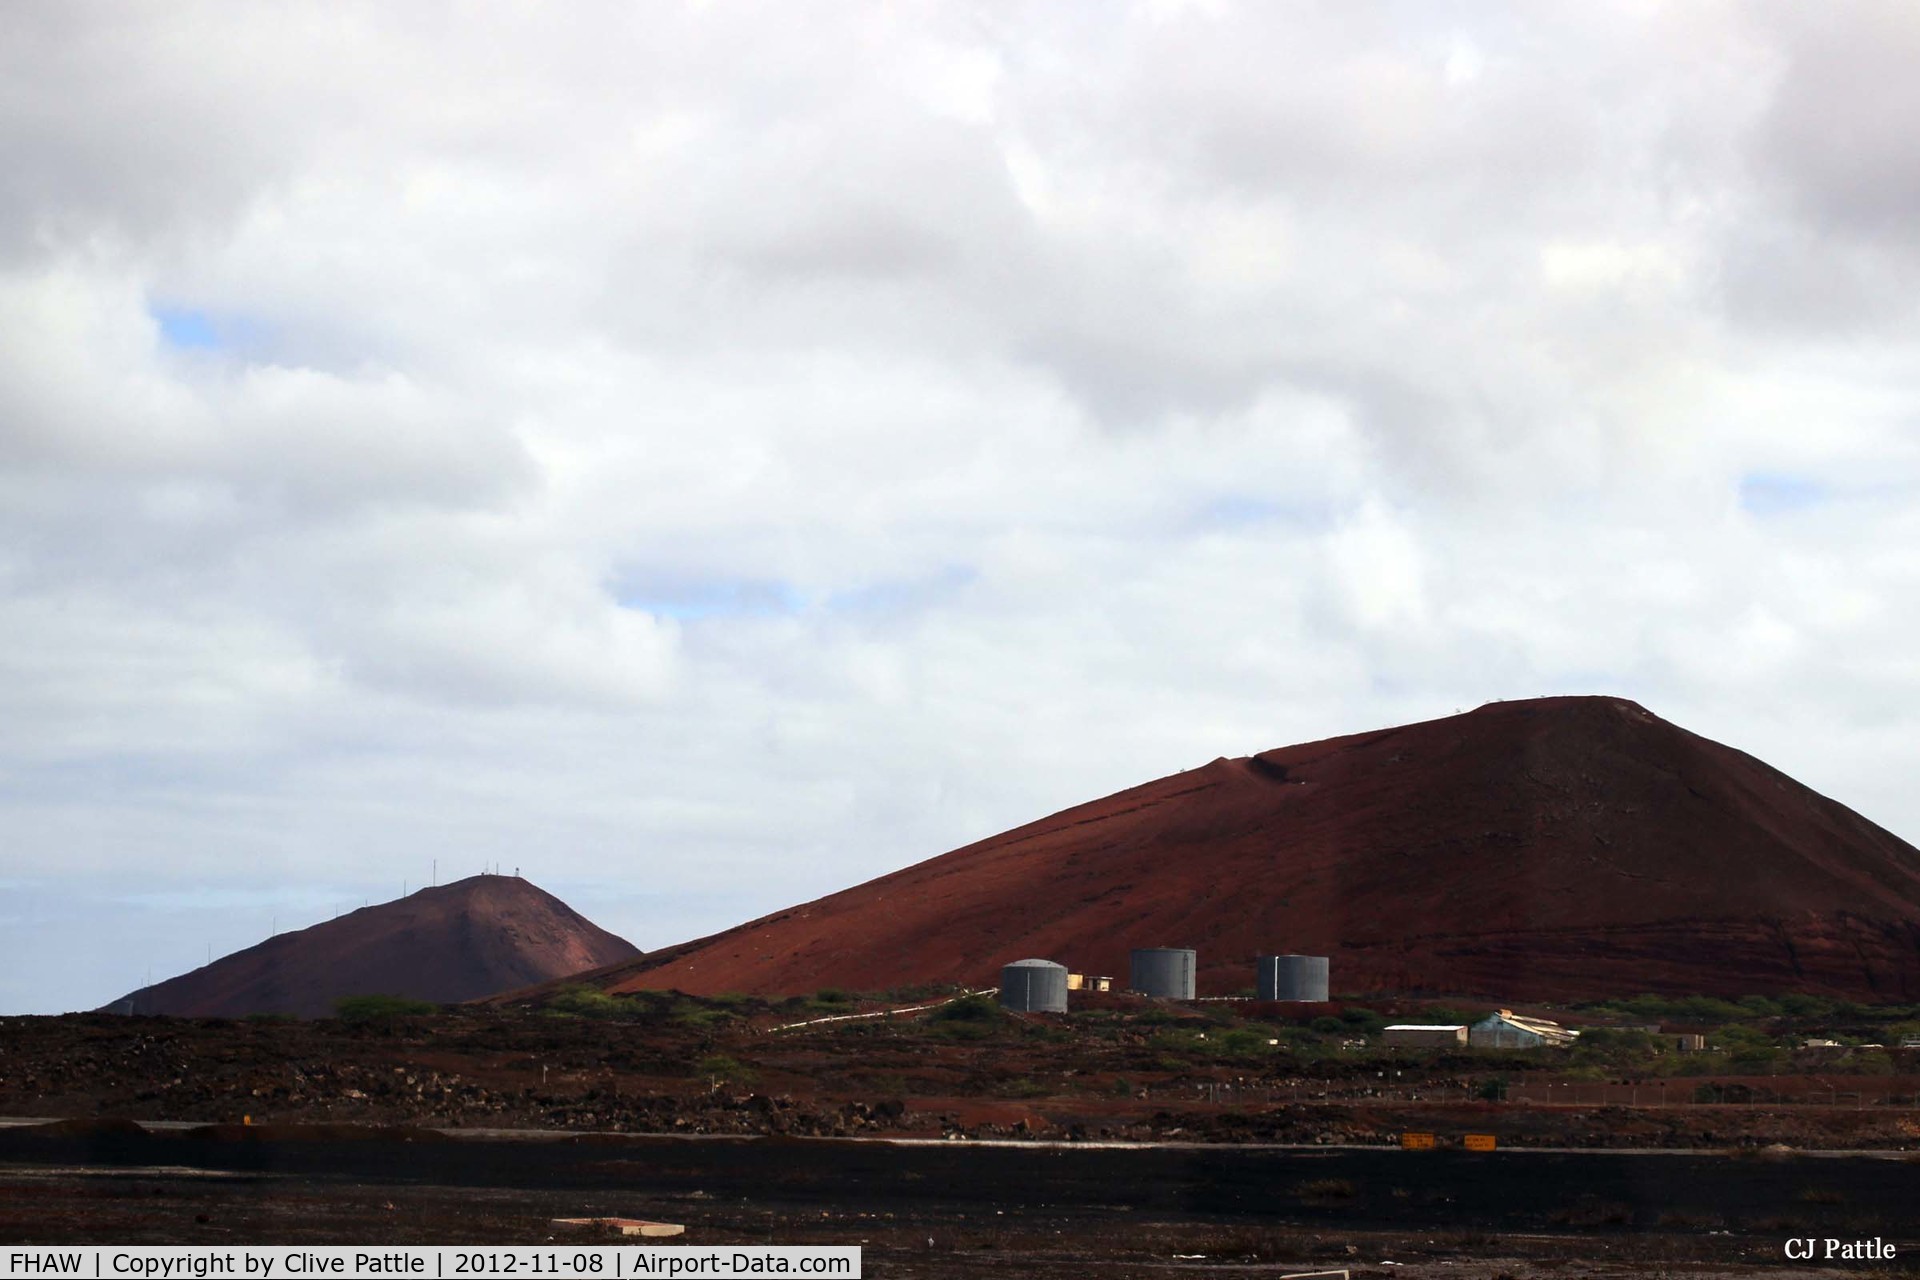 FHAW Airport - A view across the apron and runway from the terminal buildings at Ascension Island